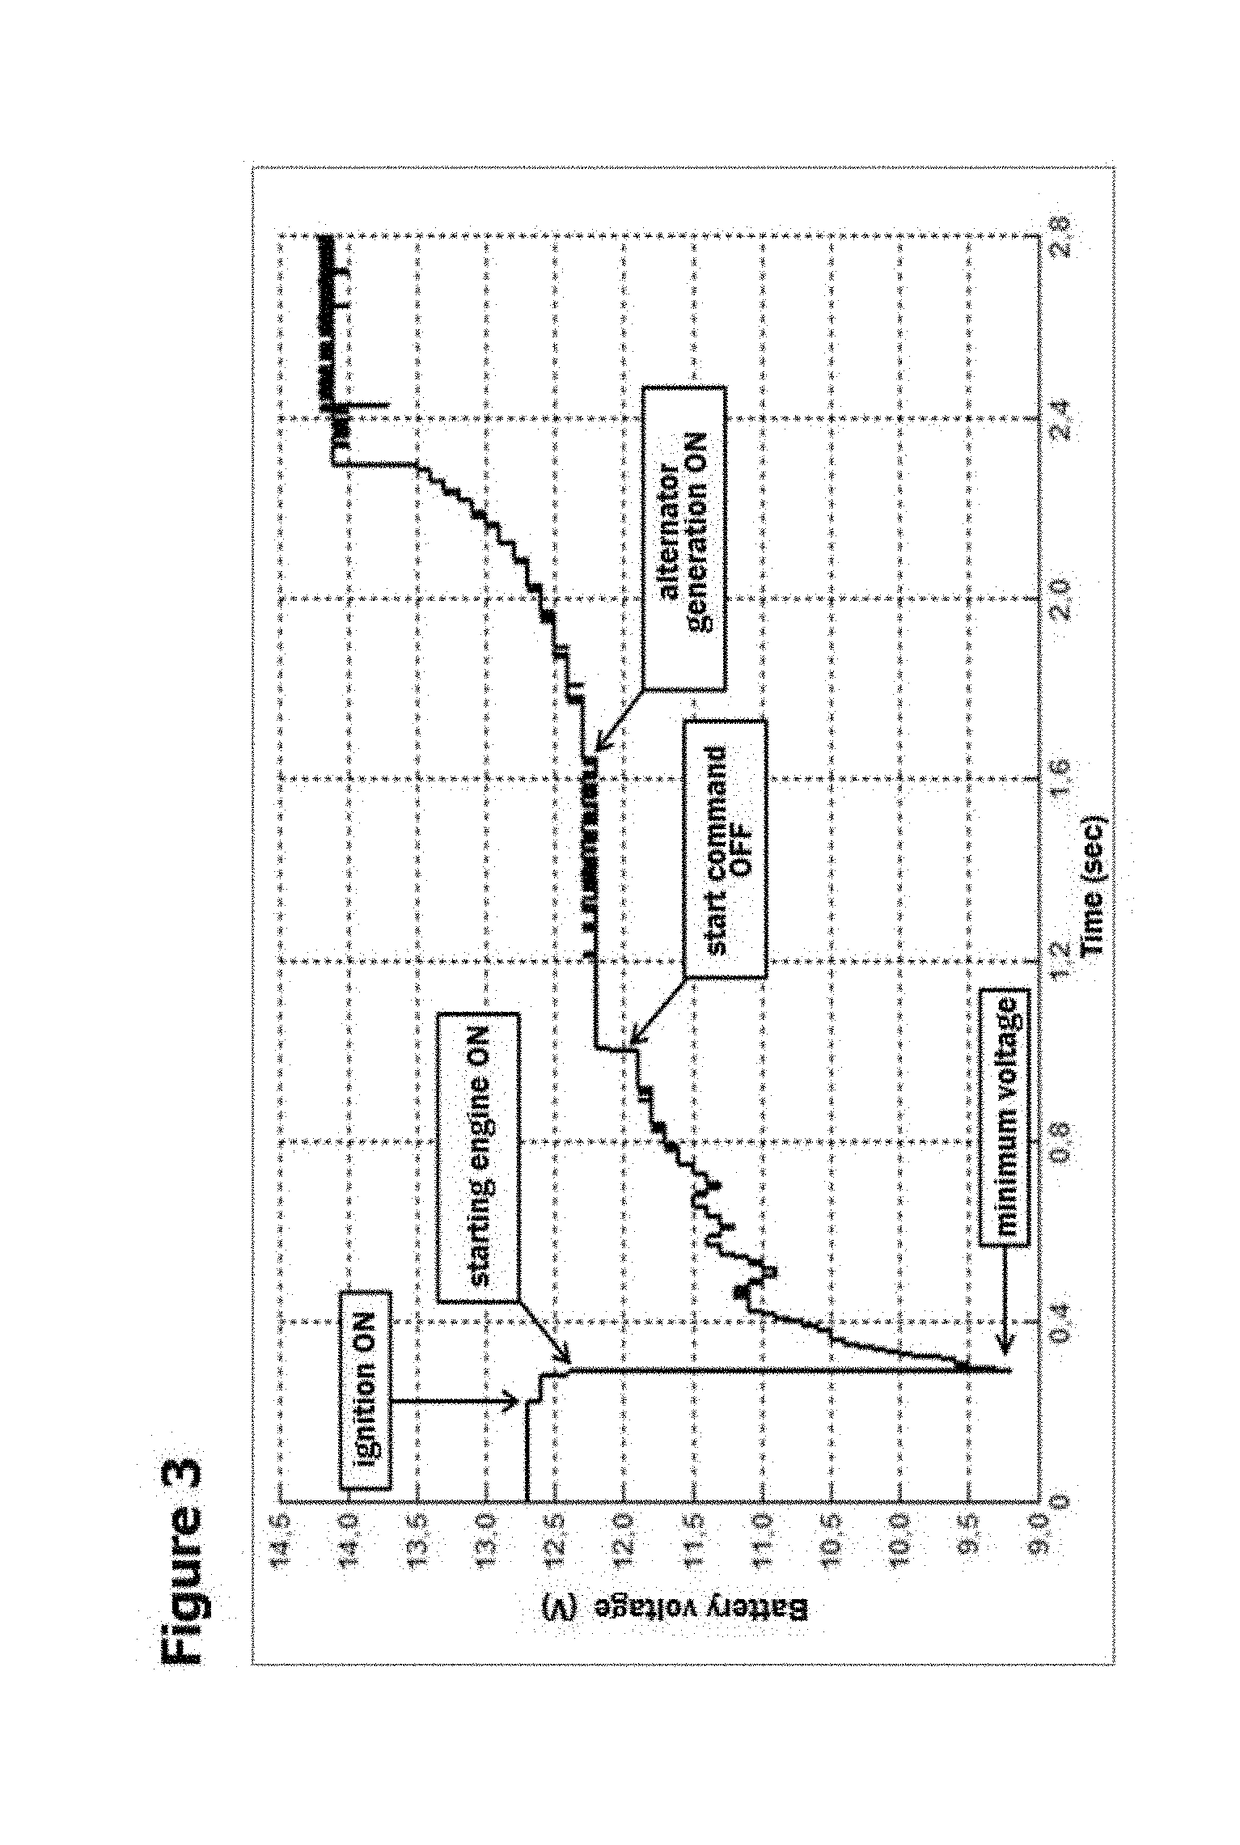 System and Method of Battery Monitoring